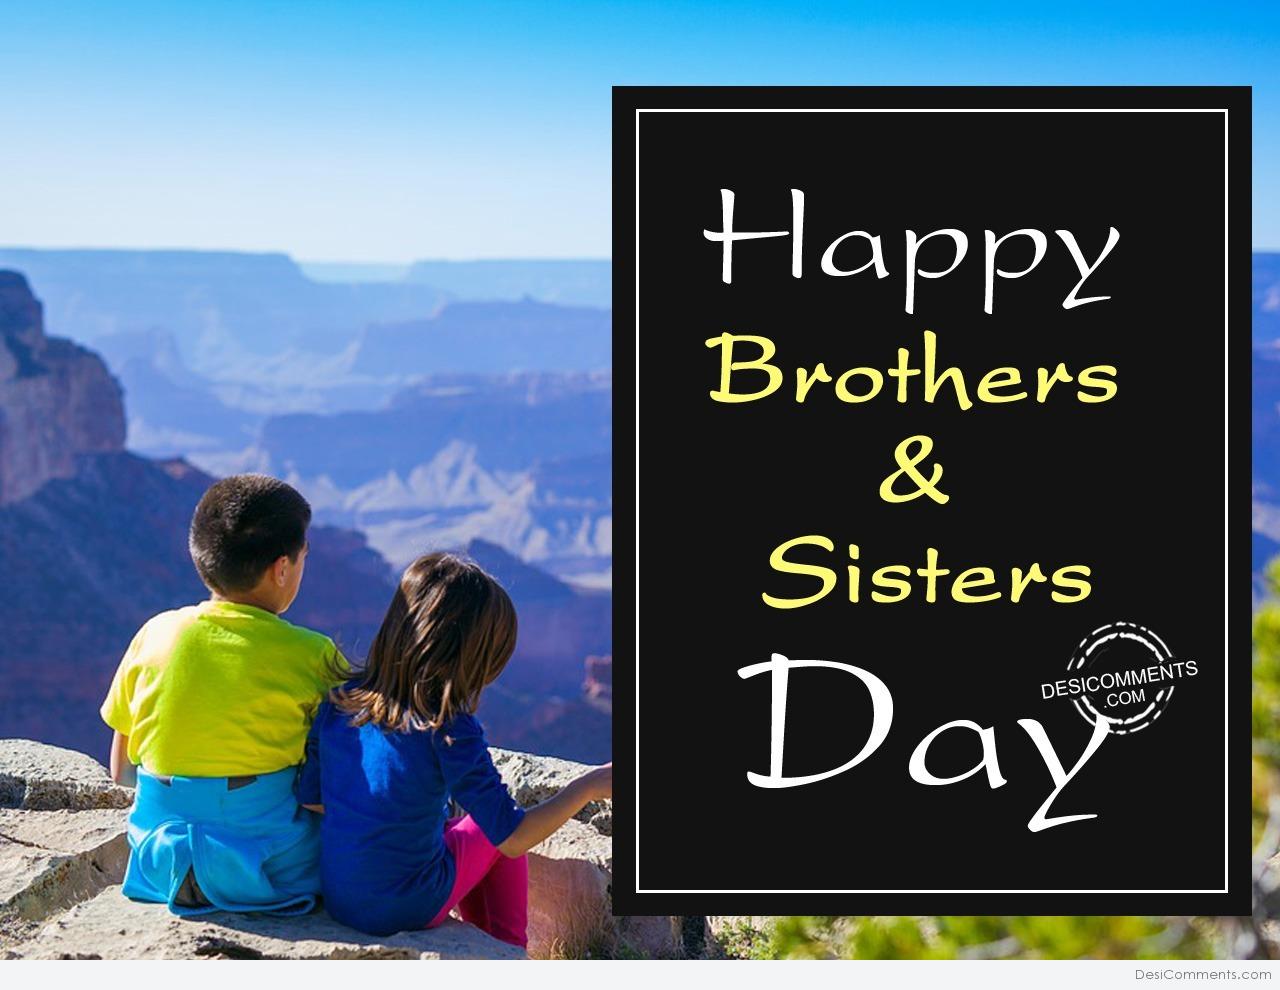 Happy brothers & Sisters Day - DesiComments.com